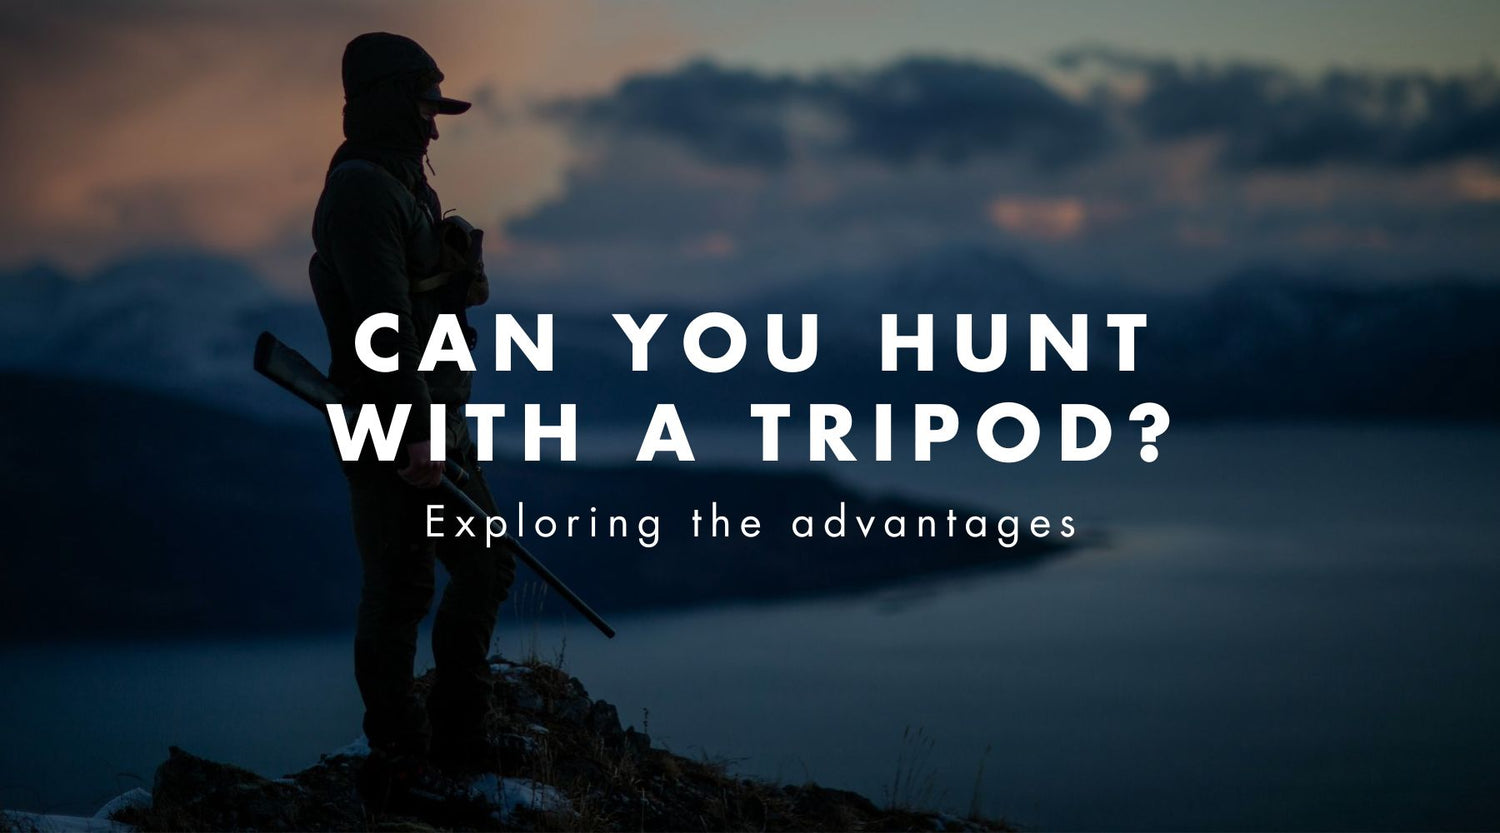 Can you hunt with a tripod? Photo by  Jordan Bergendahl